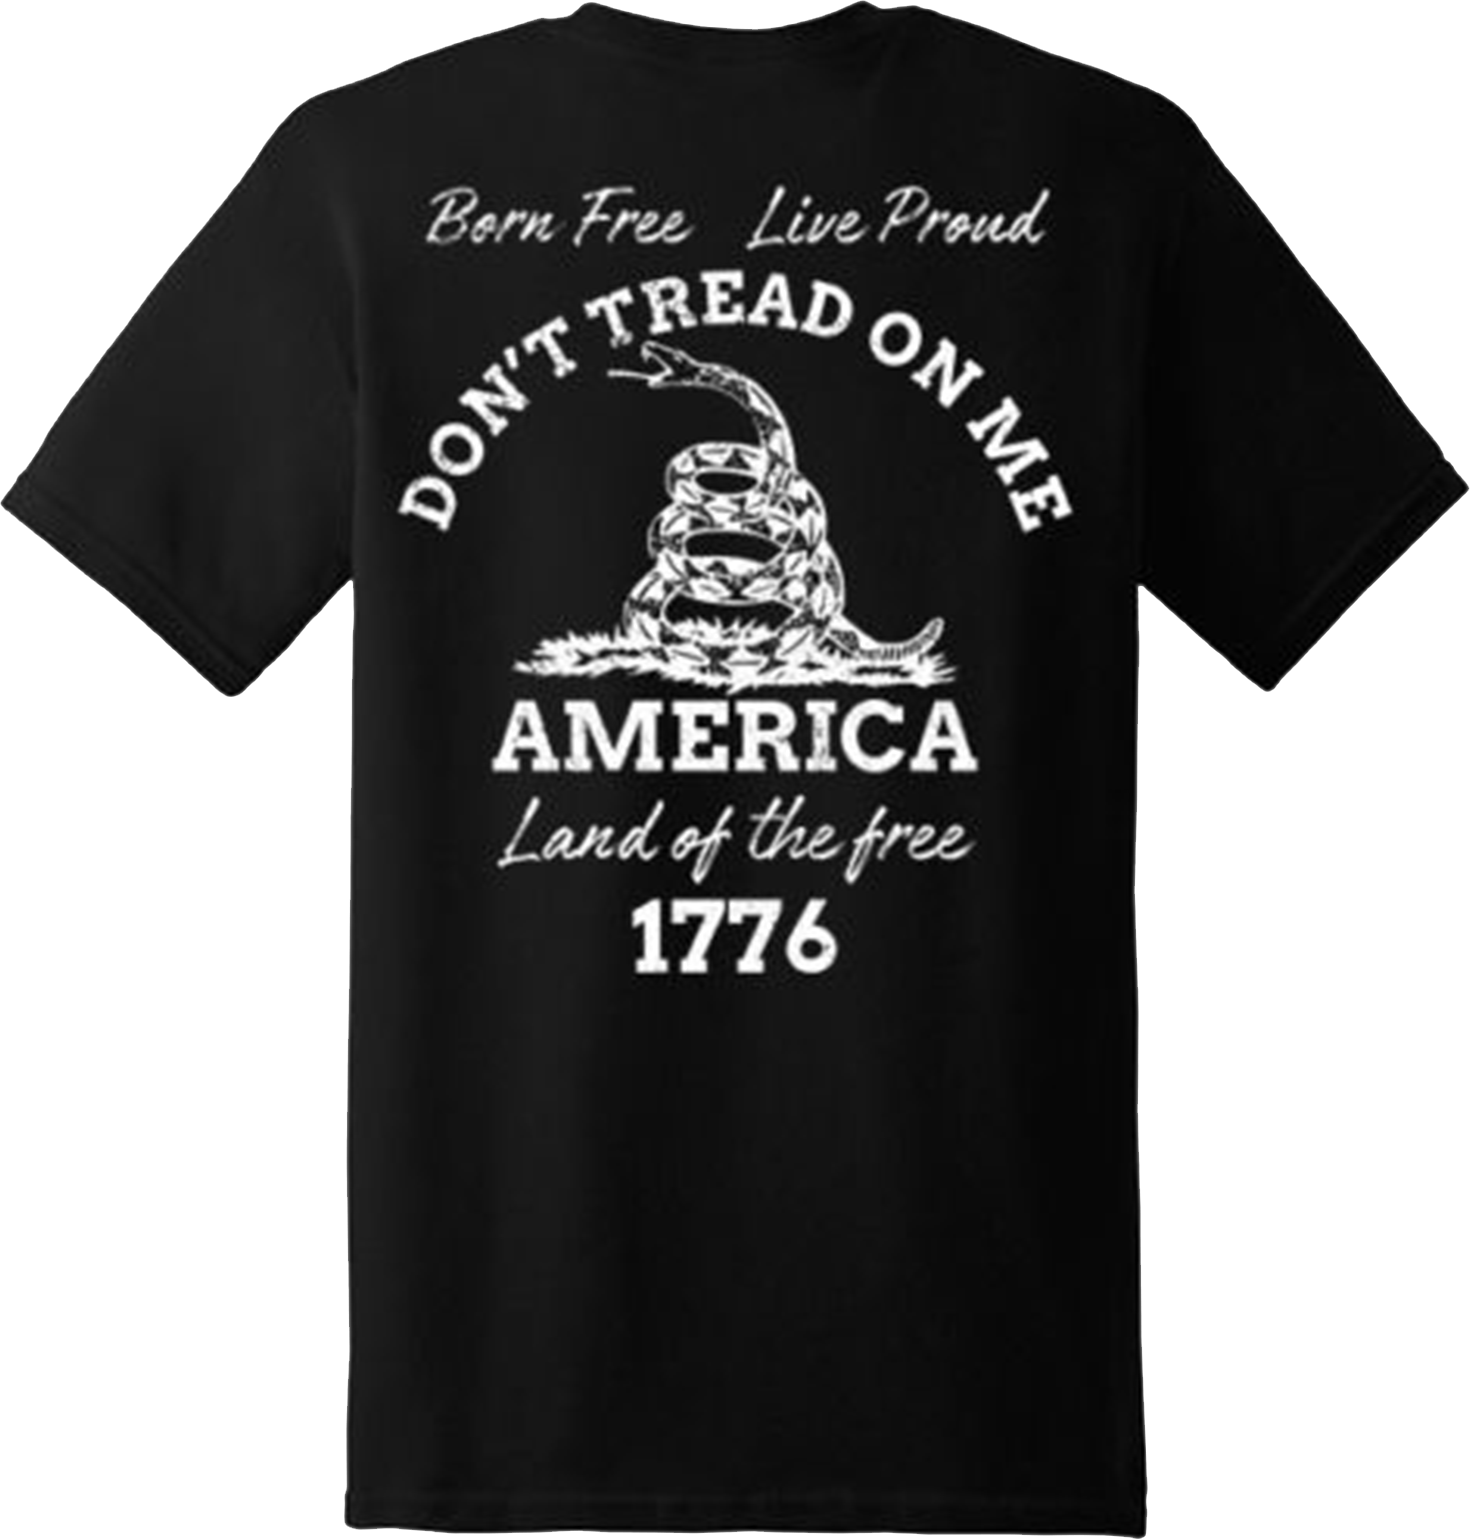 Land of the free Patriotic American T Shirt New Graphic Tee(Back Printed)